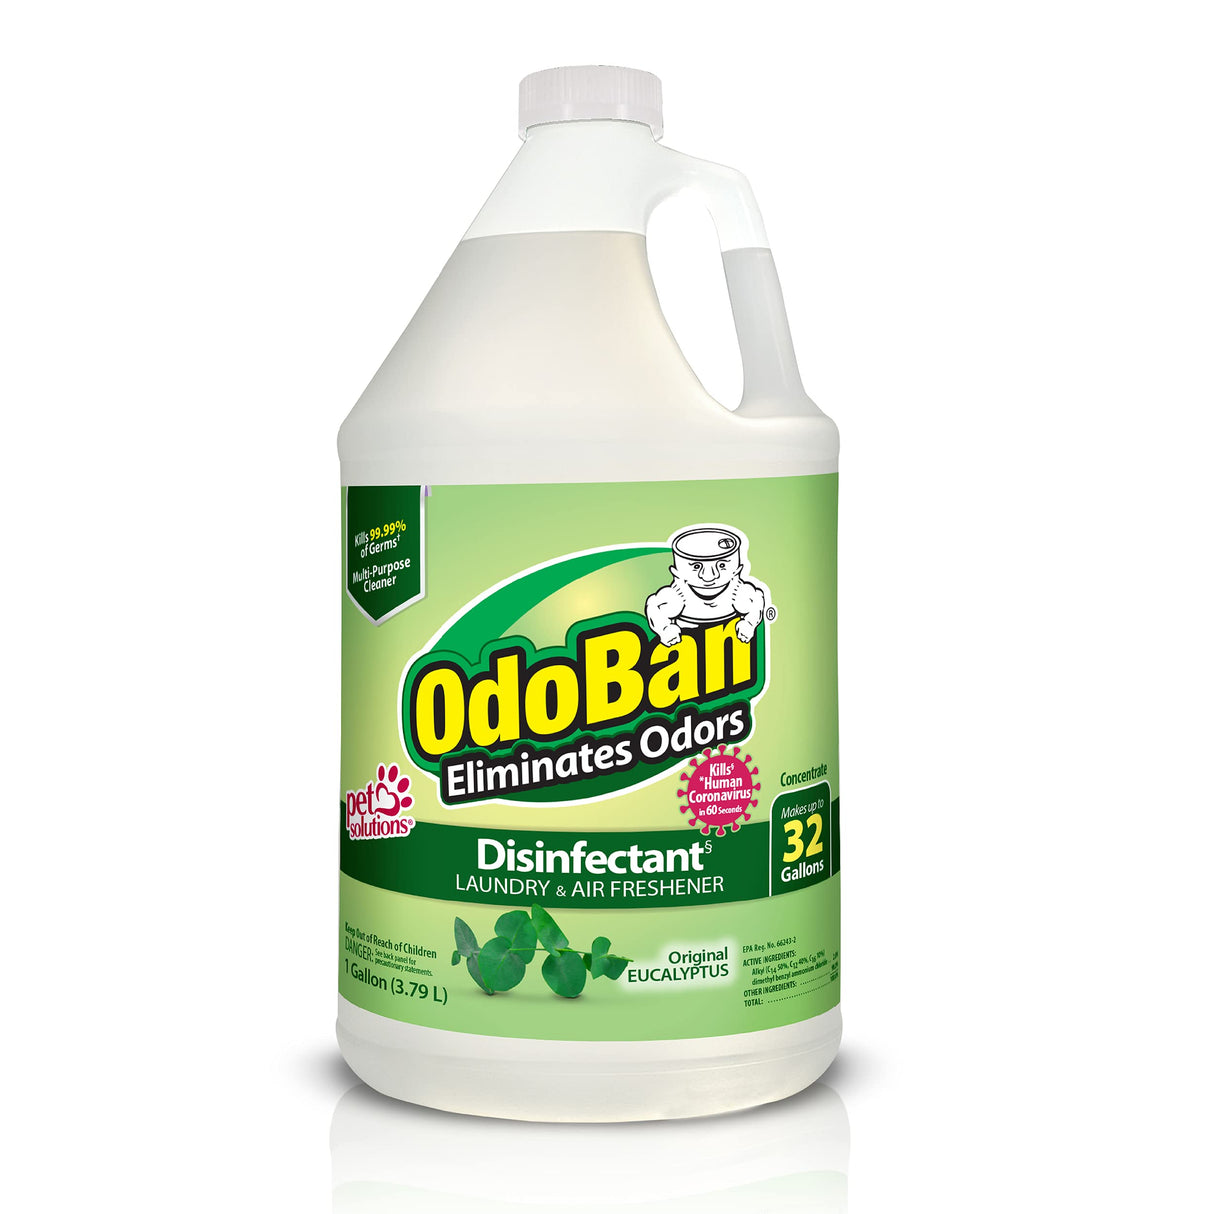 OdoBan Odor Eliminator and Disinfectant Concentrate, Eucalyptus Scent (1-Gallon)